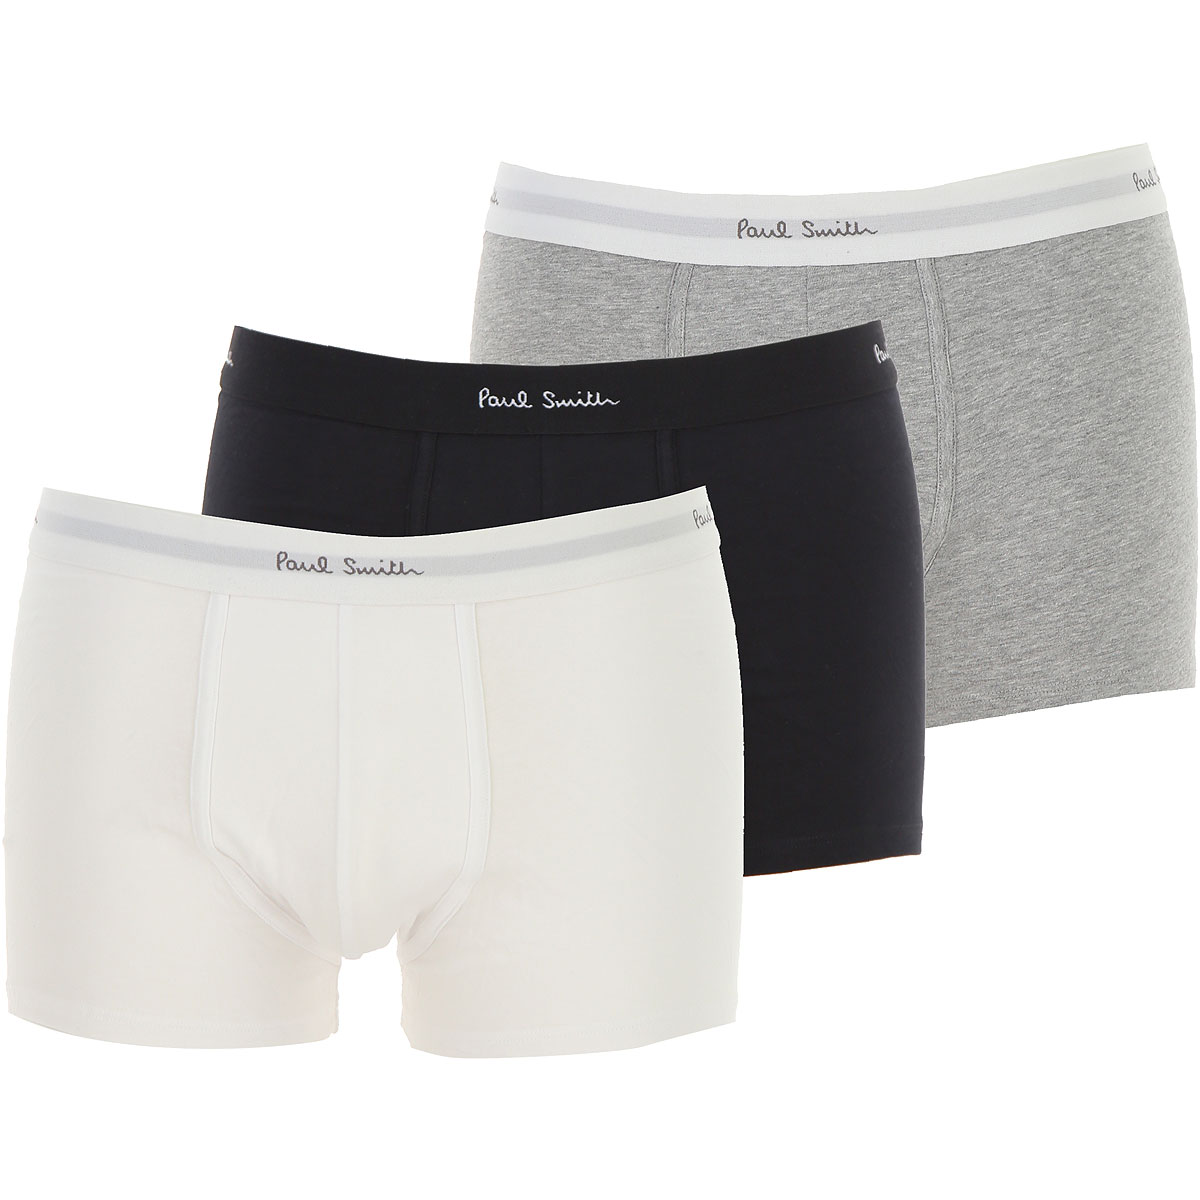 Mens Underwear Paul Smith, Style code: m1a-914c-a3pcka